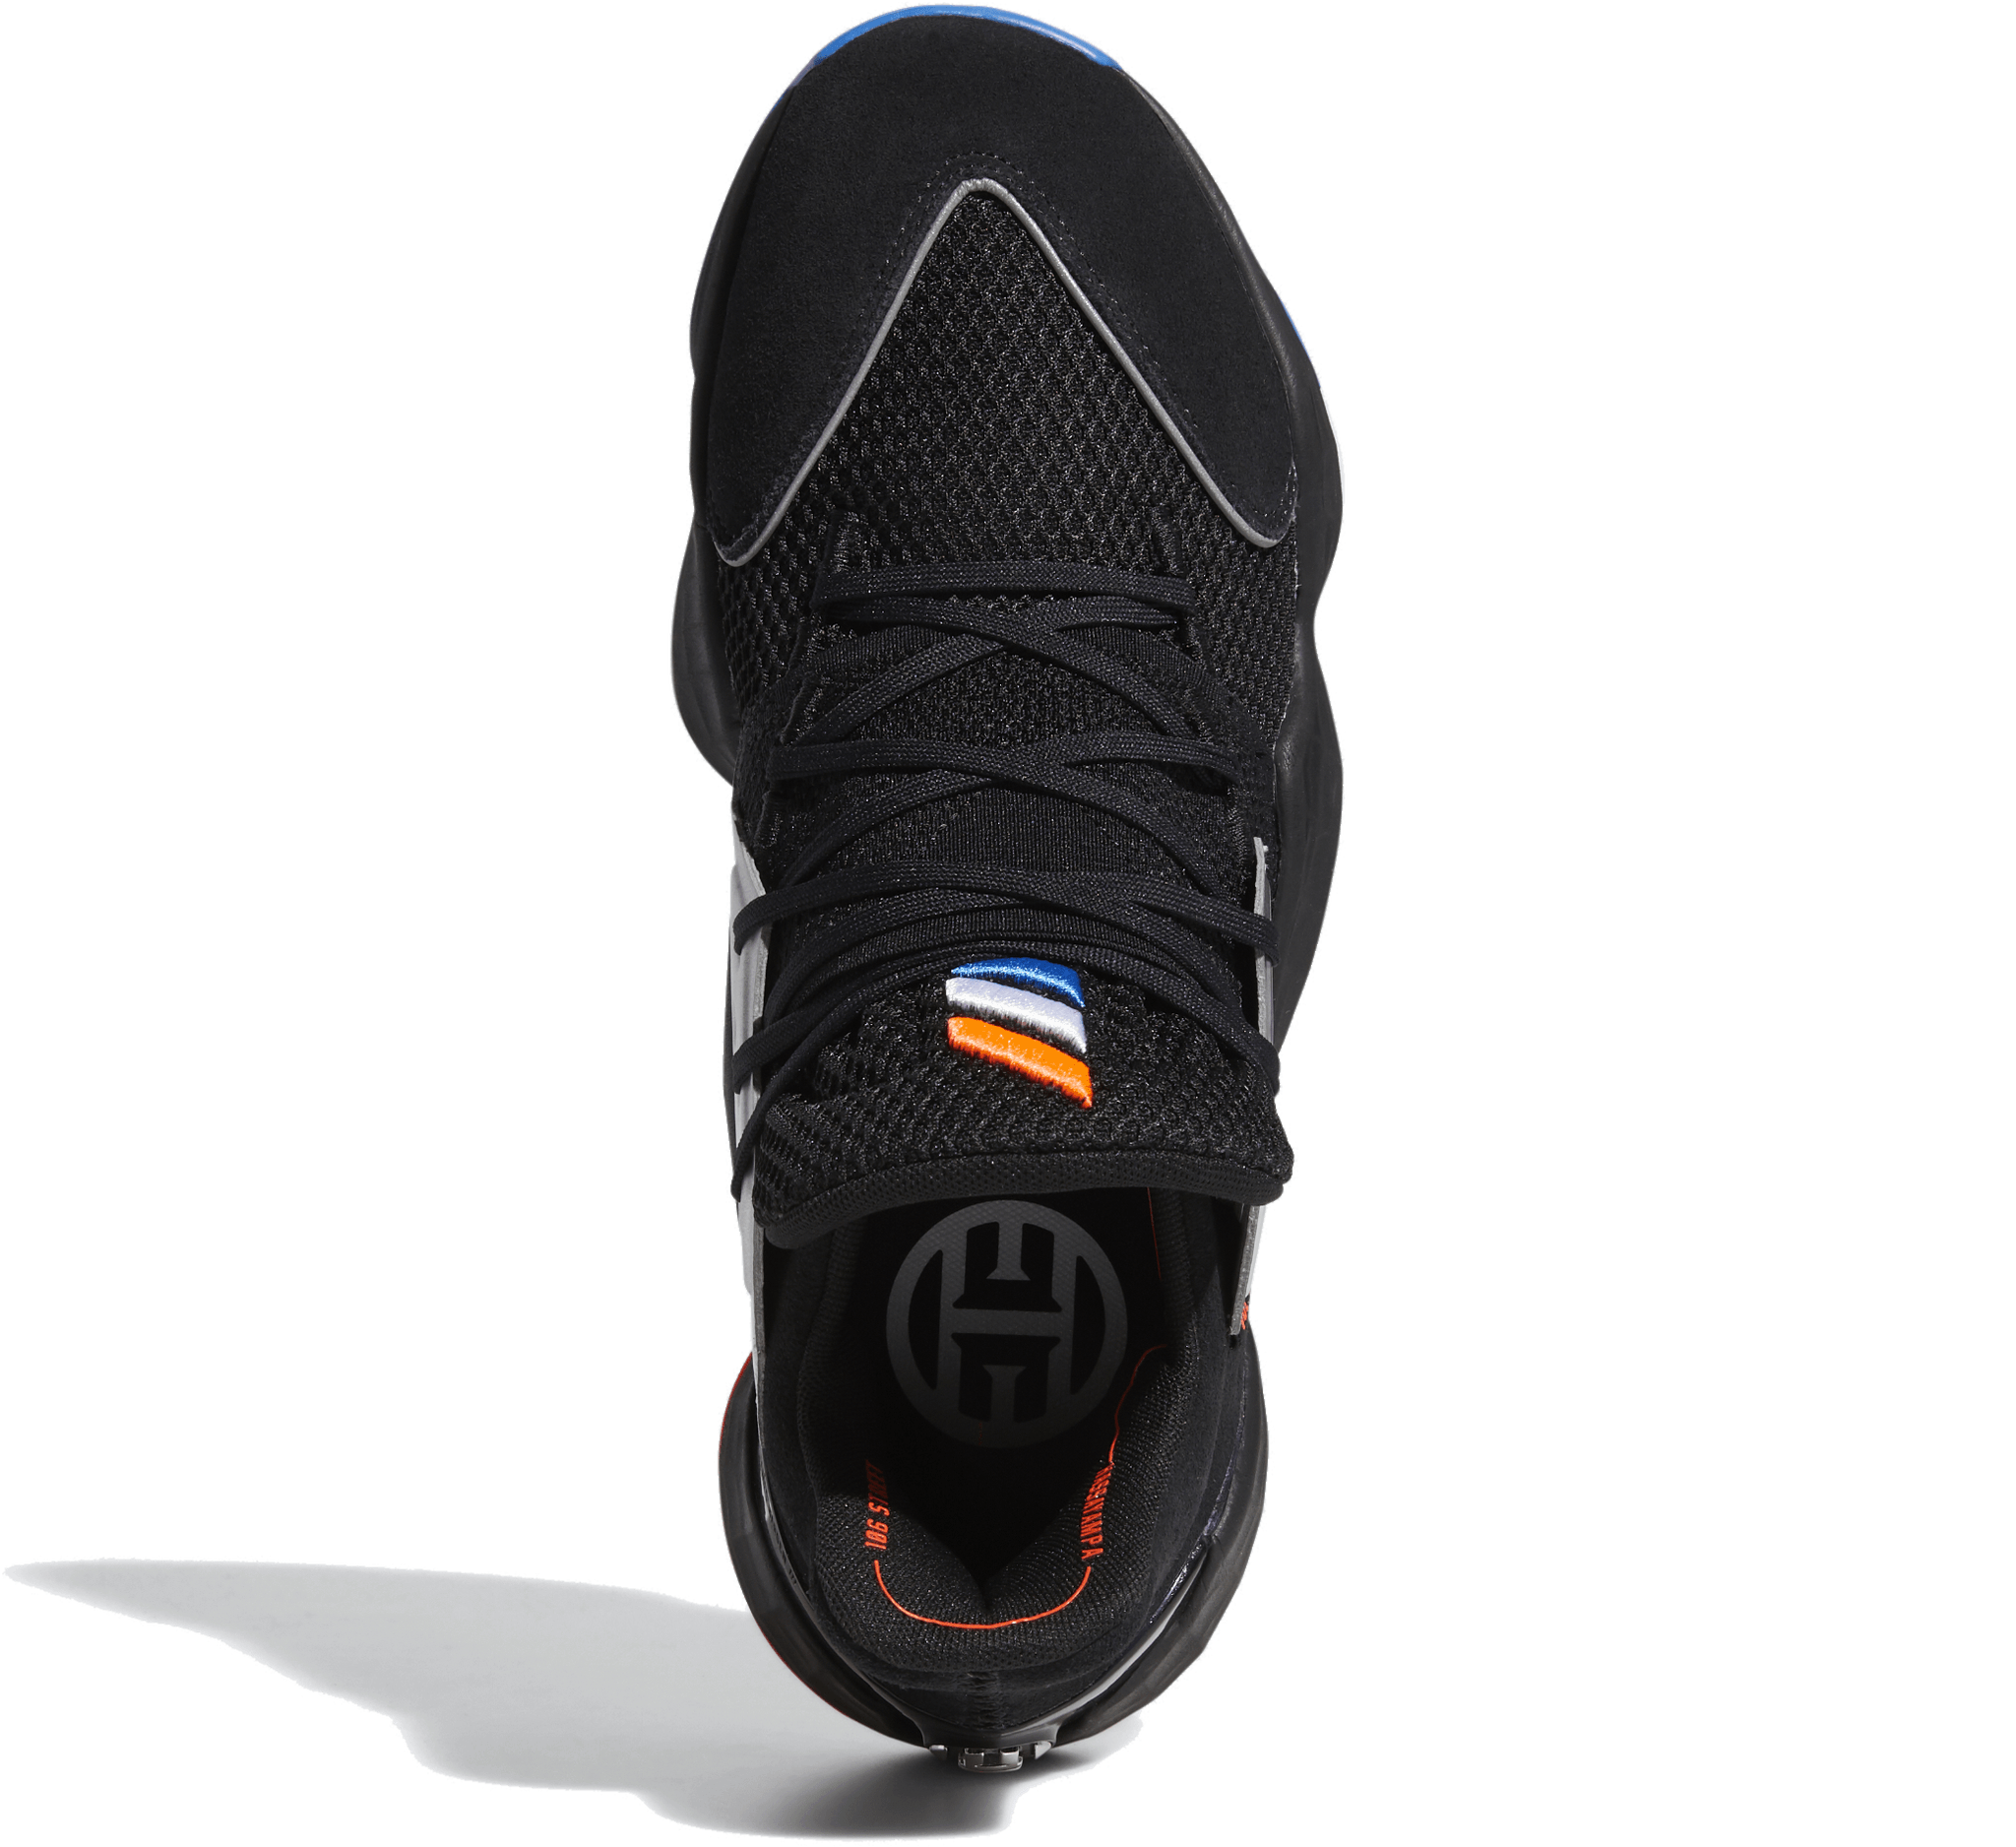 are harden vol 4 good for outdoor